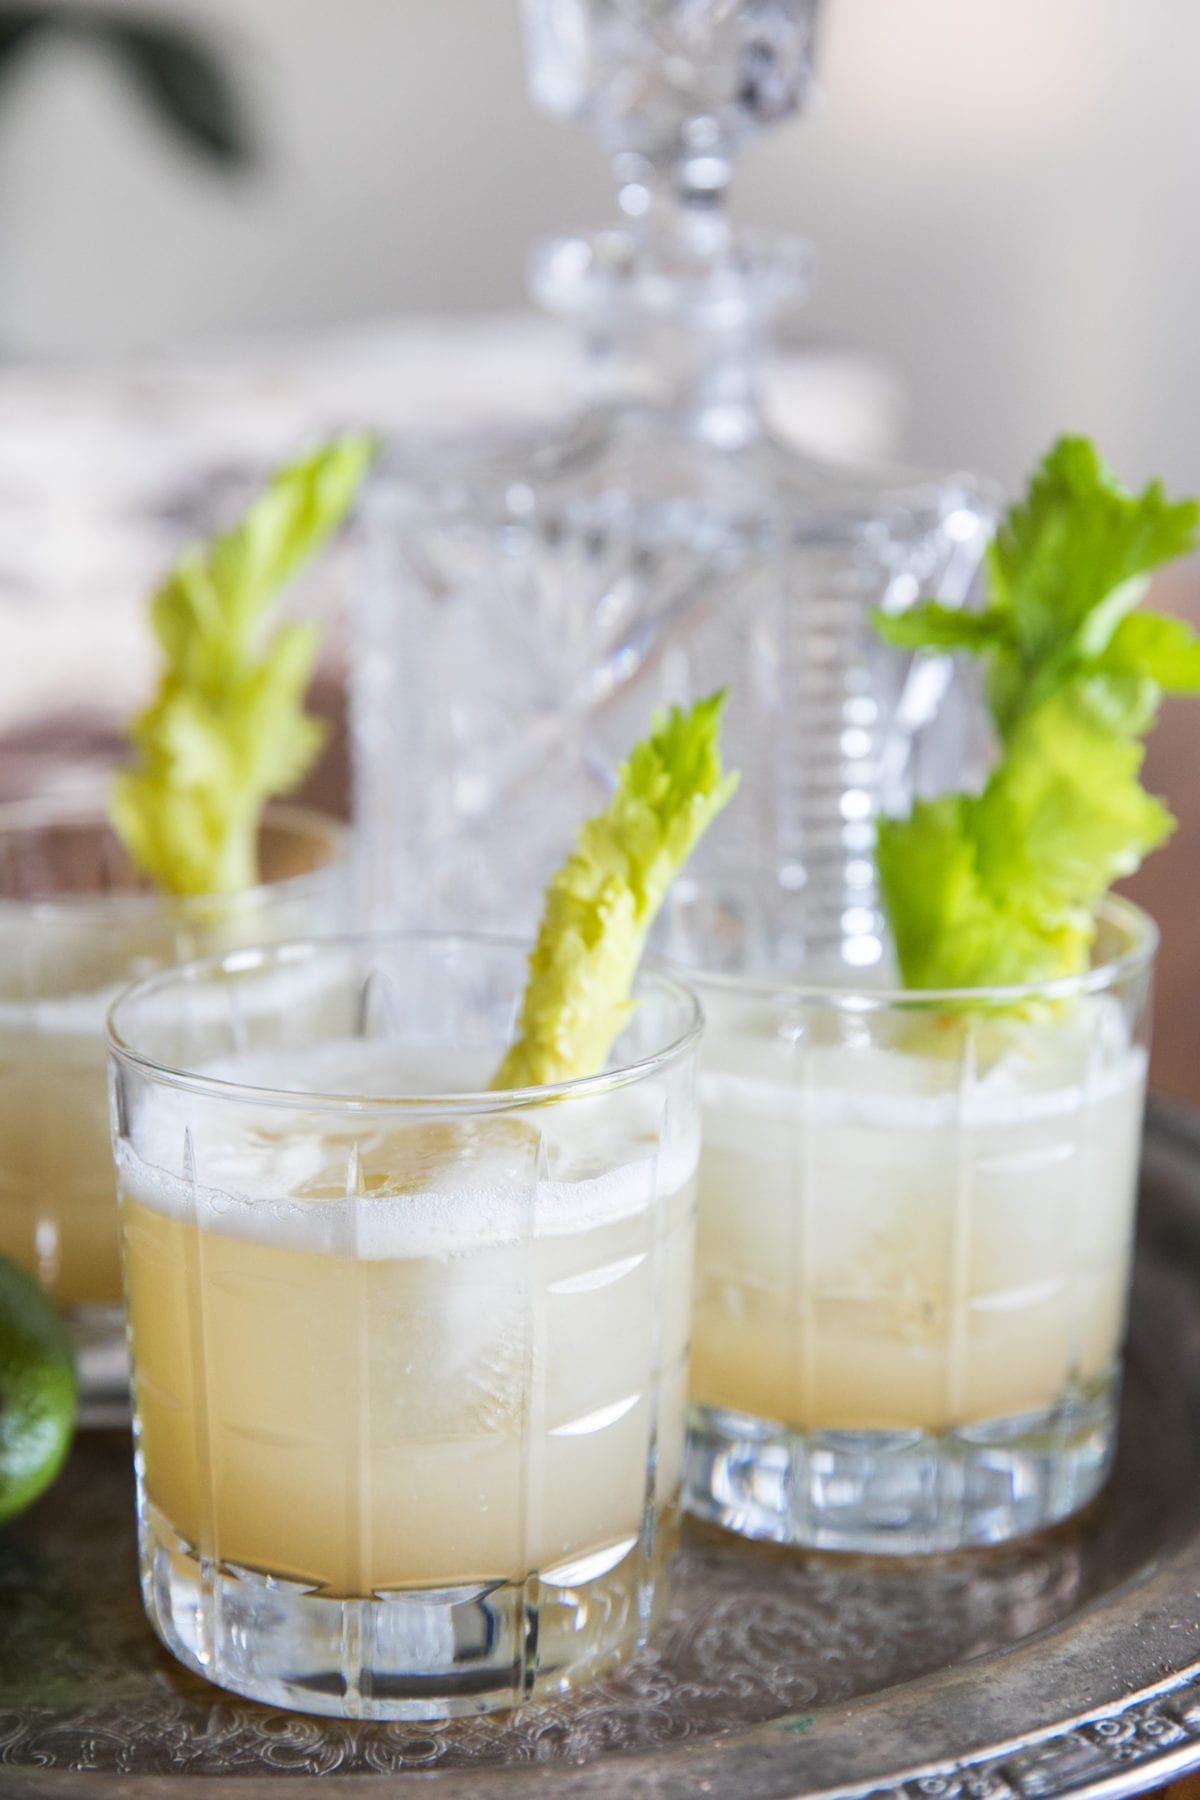 Kombucha Cocktails | Tequila Gingerade With A Kick | Mixology | Jessica Brigham | Magazine Ready for Life